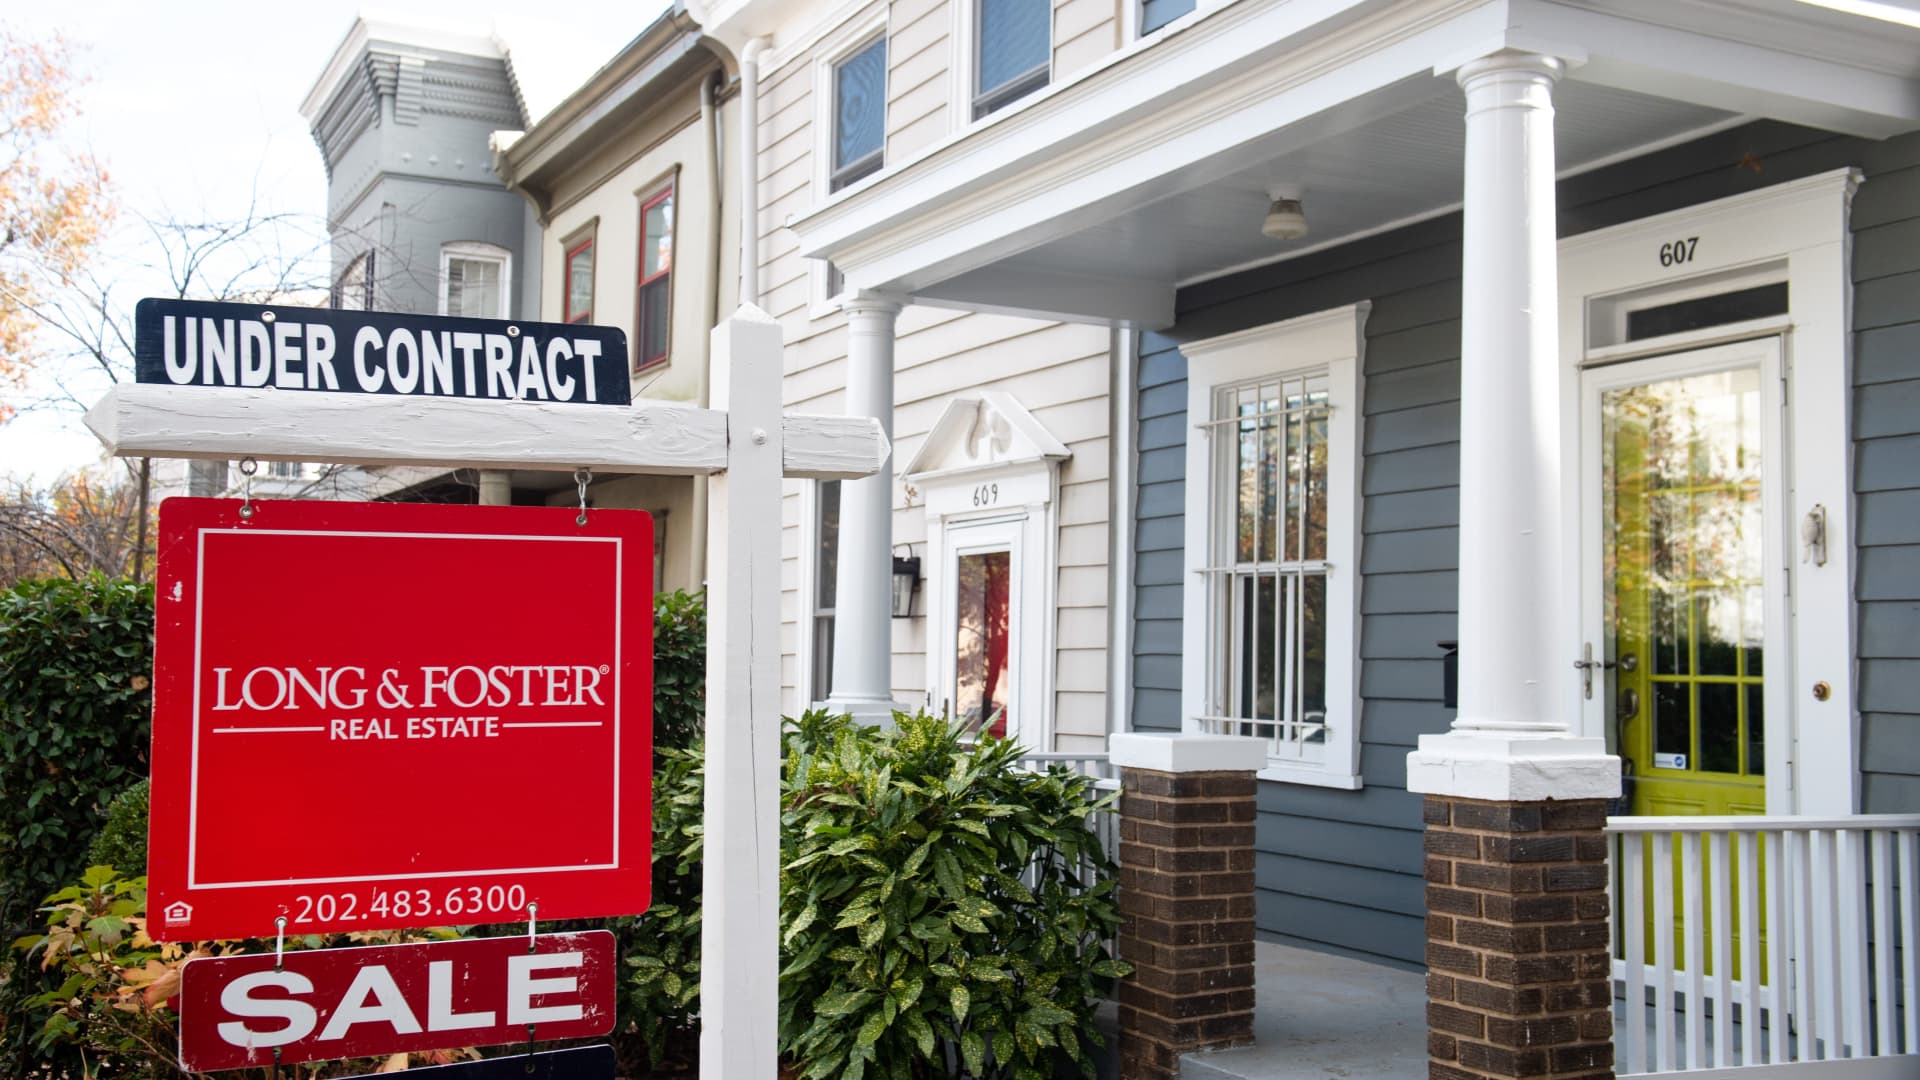 What you need to know about backing out of a home purchase when you’re under contract - CNBC